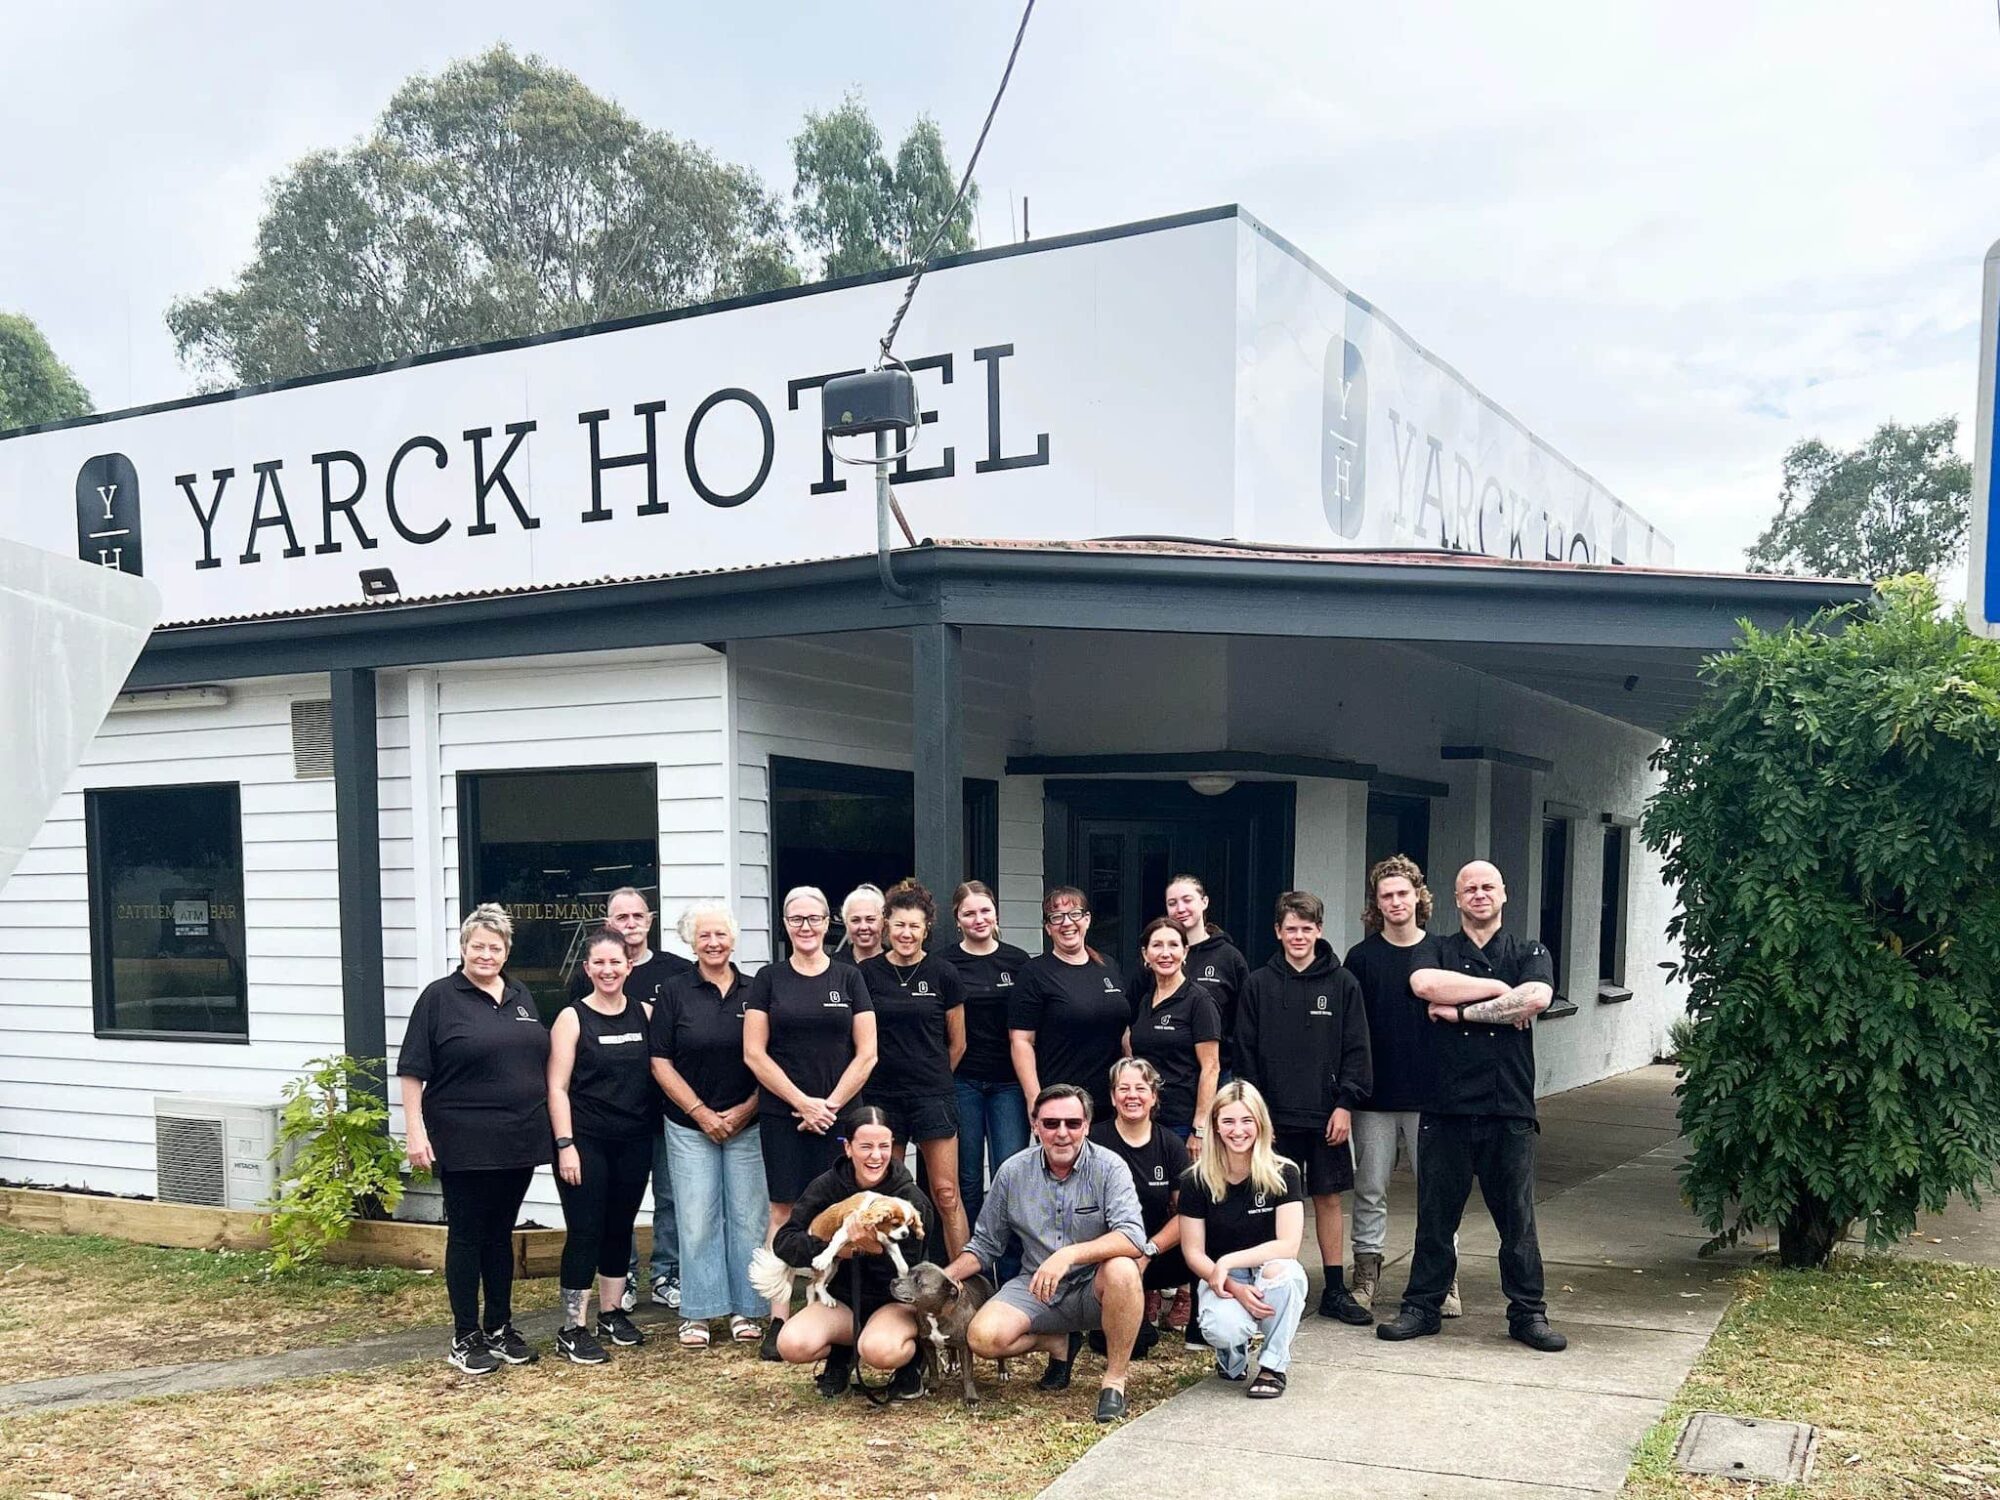 The Yarck Hotel staff out the front of the pub